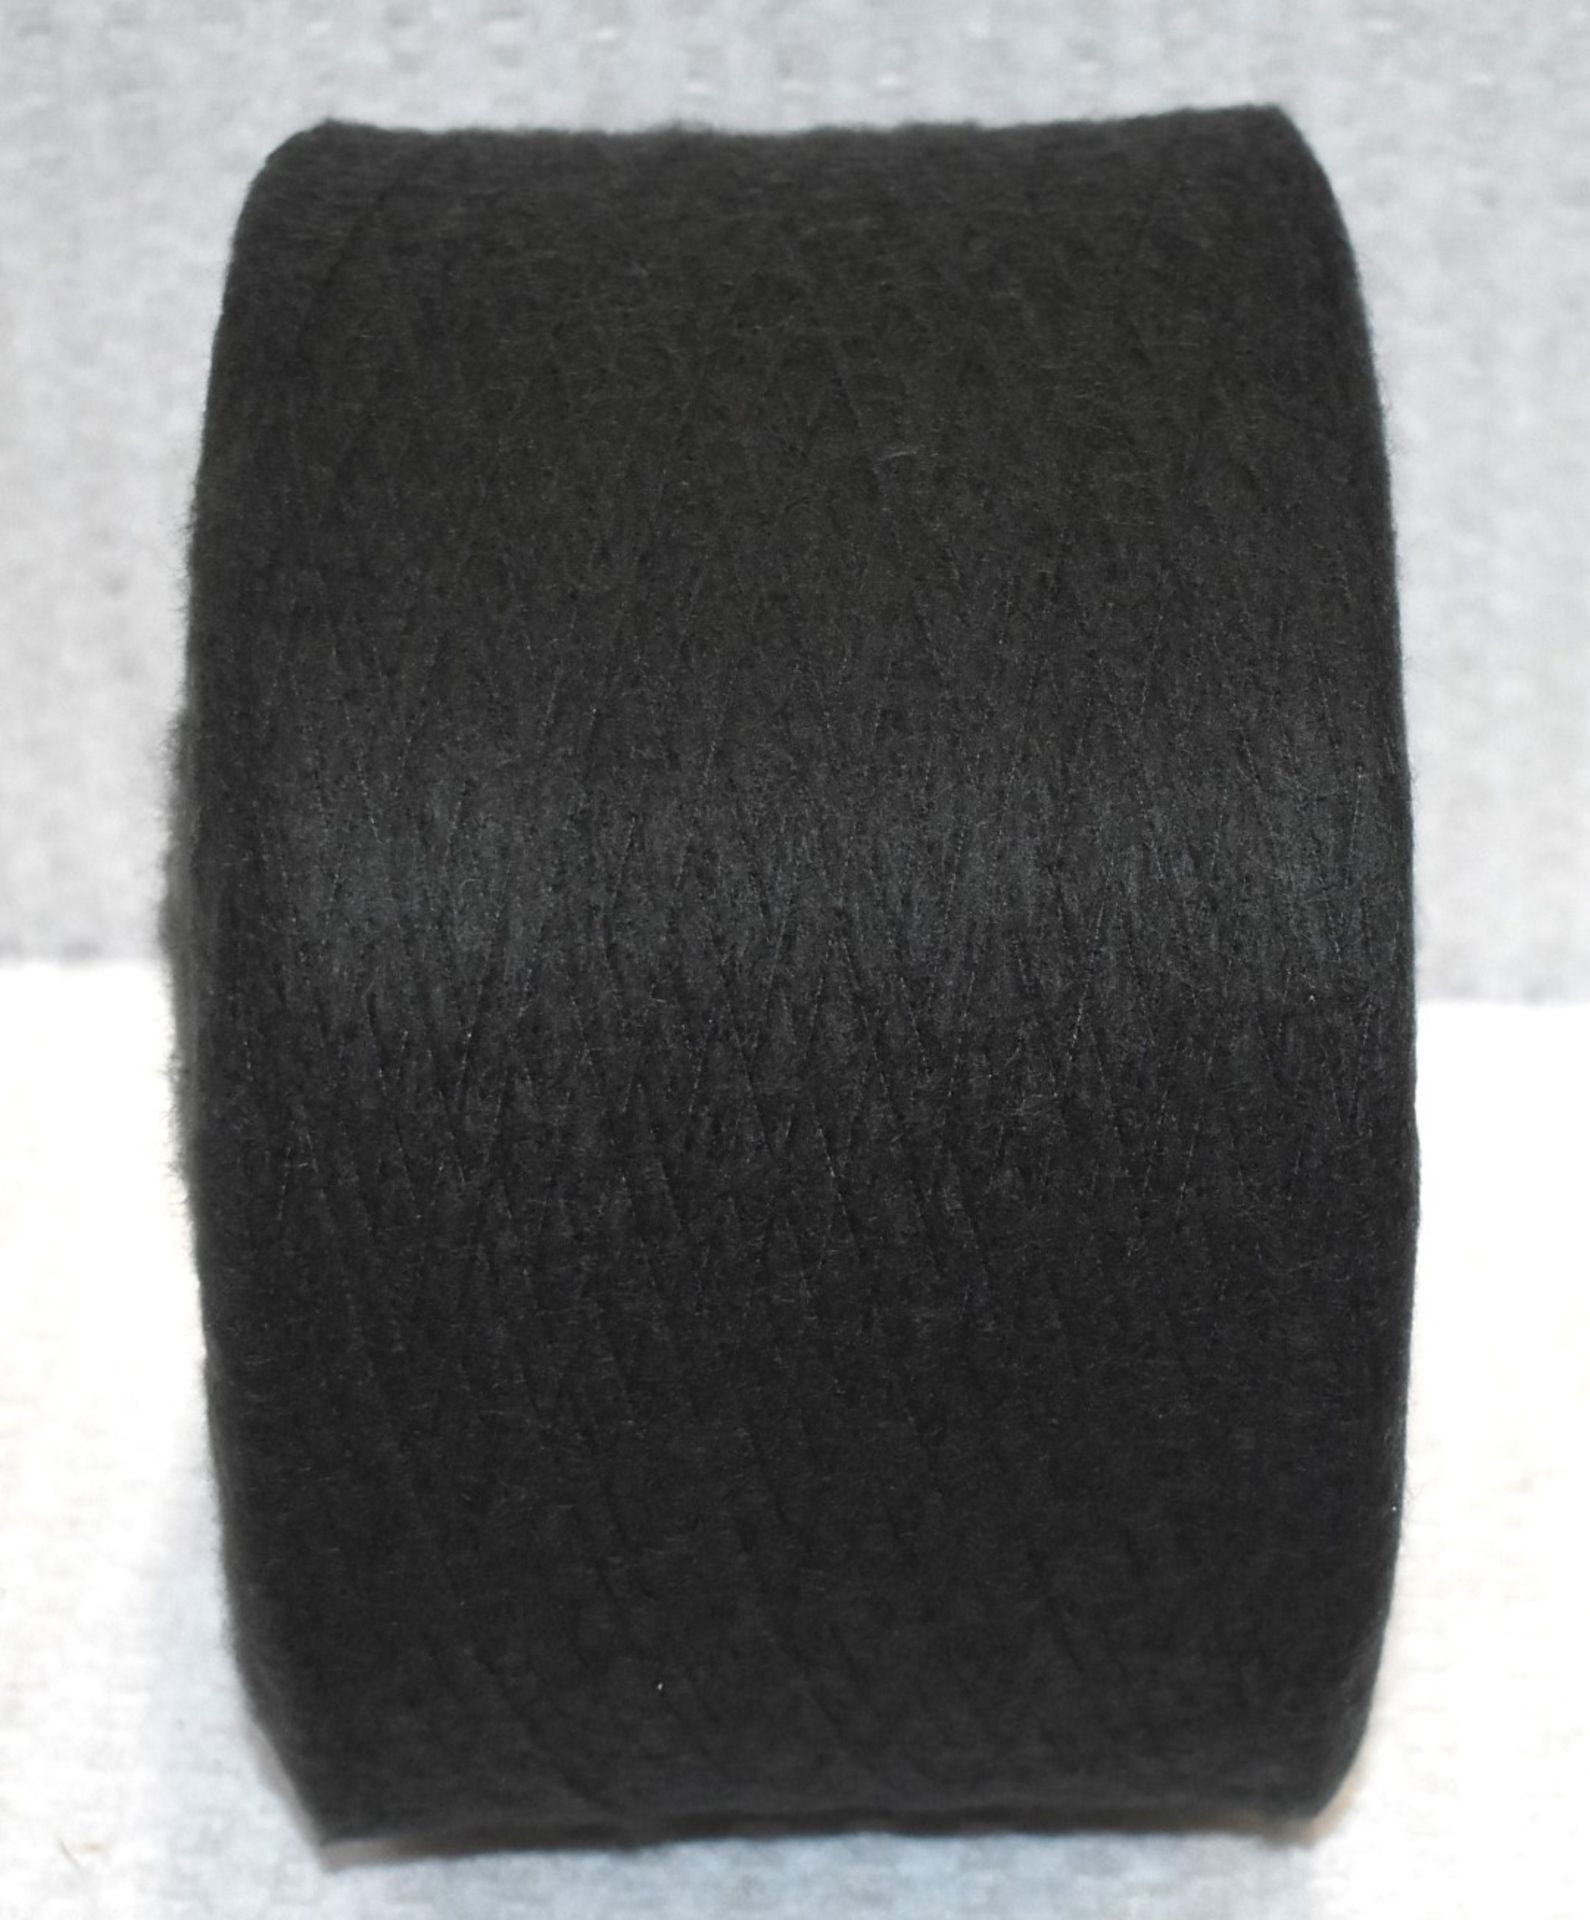 12 x Cones of 1/7,5 Lagona Knitting Yarn - Charcoal - Approx Weight: 2,300g - New Stock ABL Yarn - Image 9 of 11